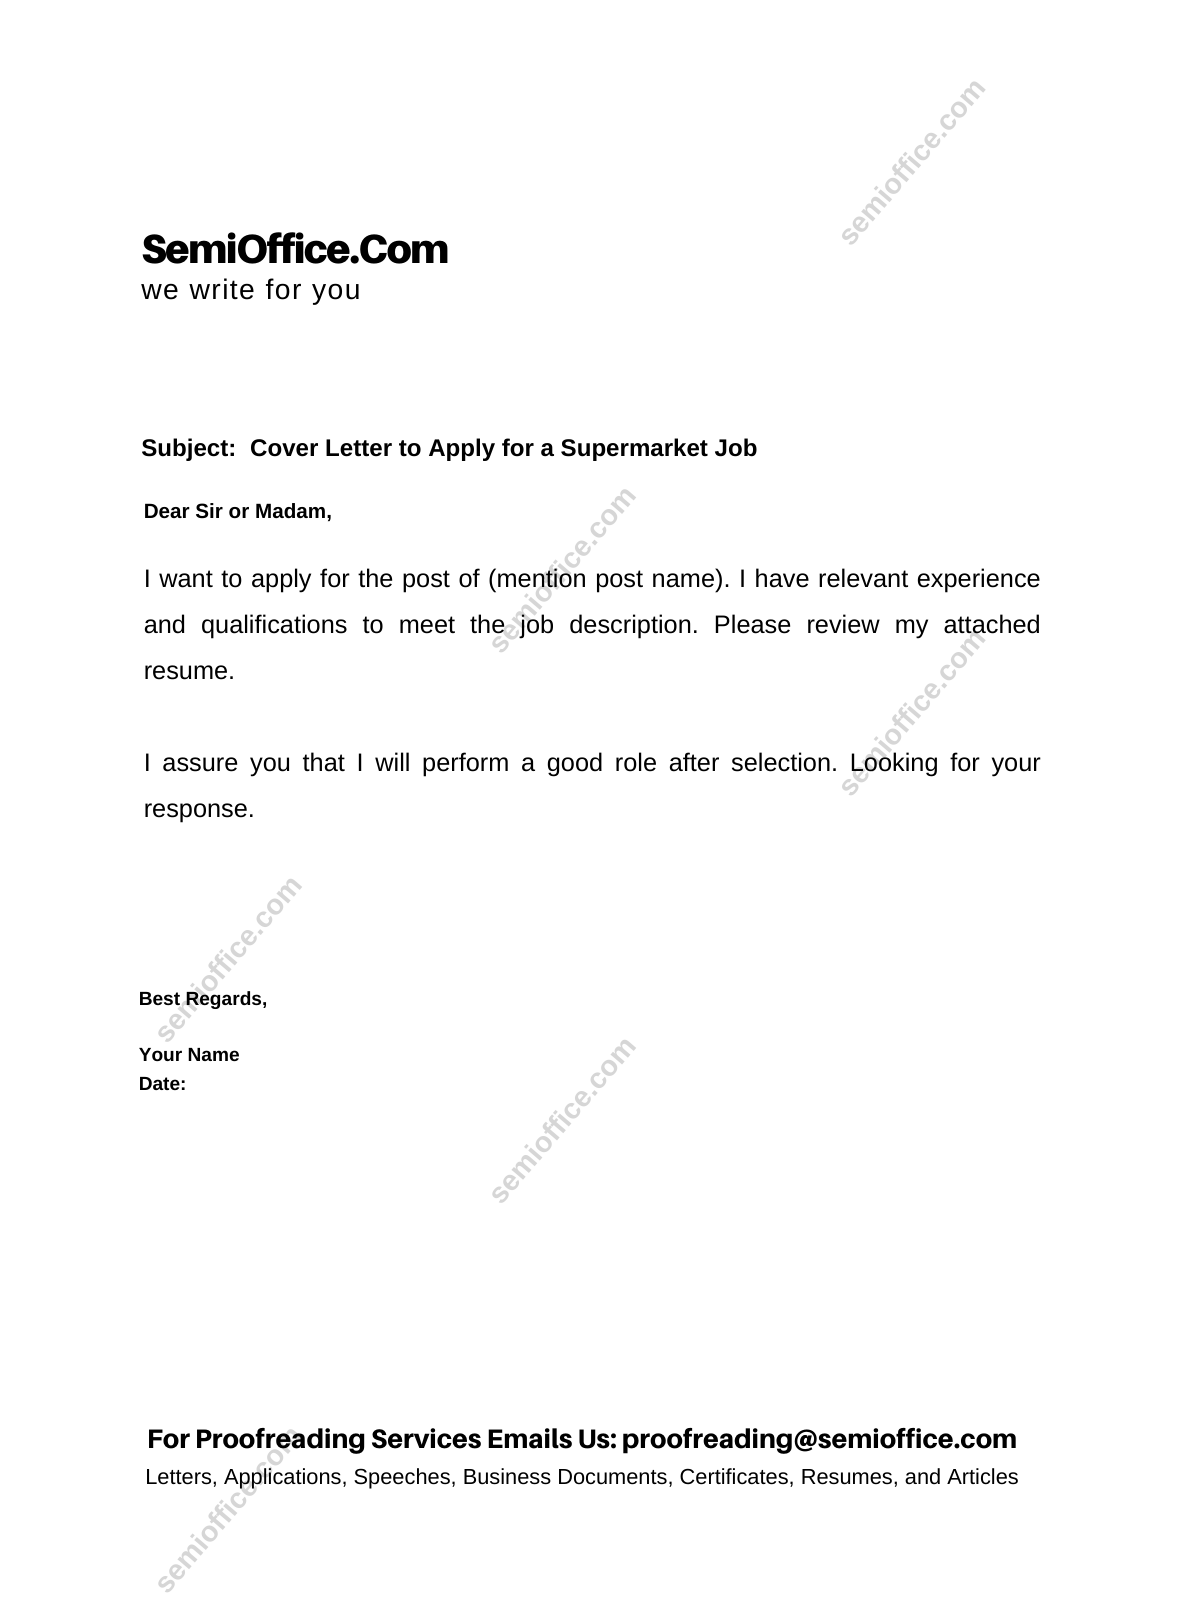 example of application letter for job in supermarket